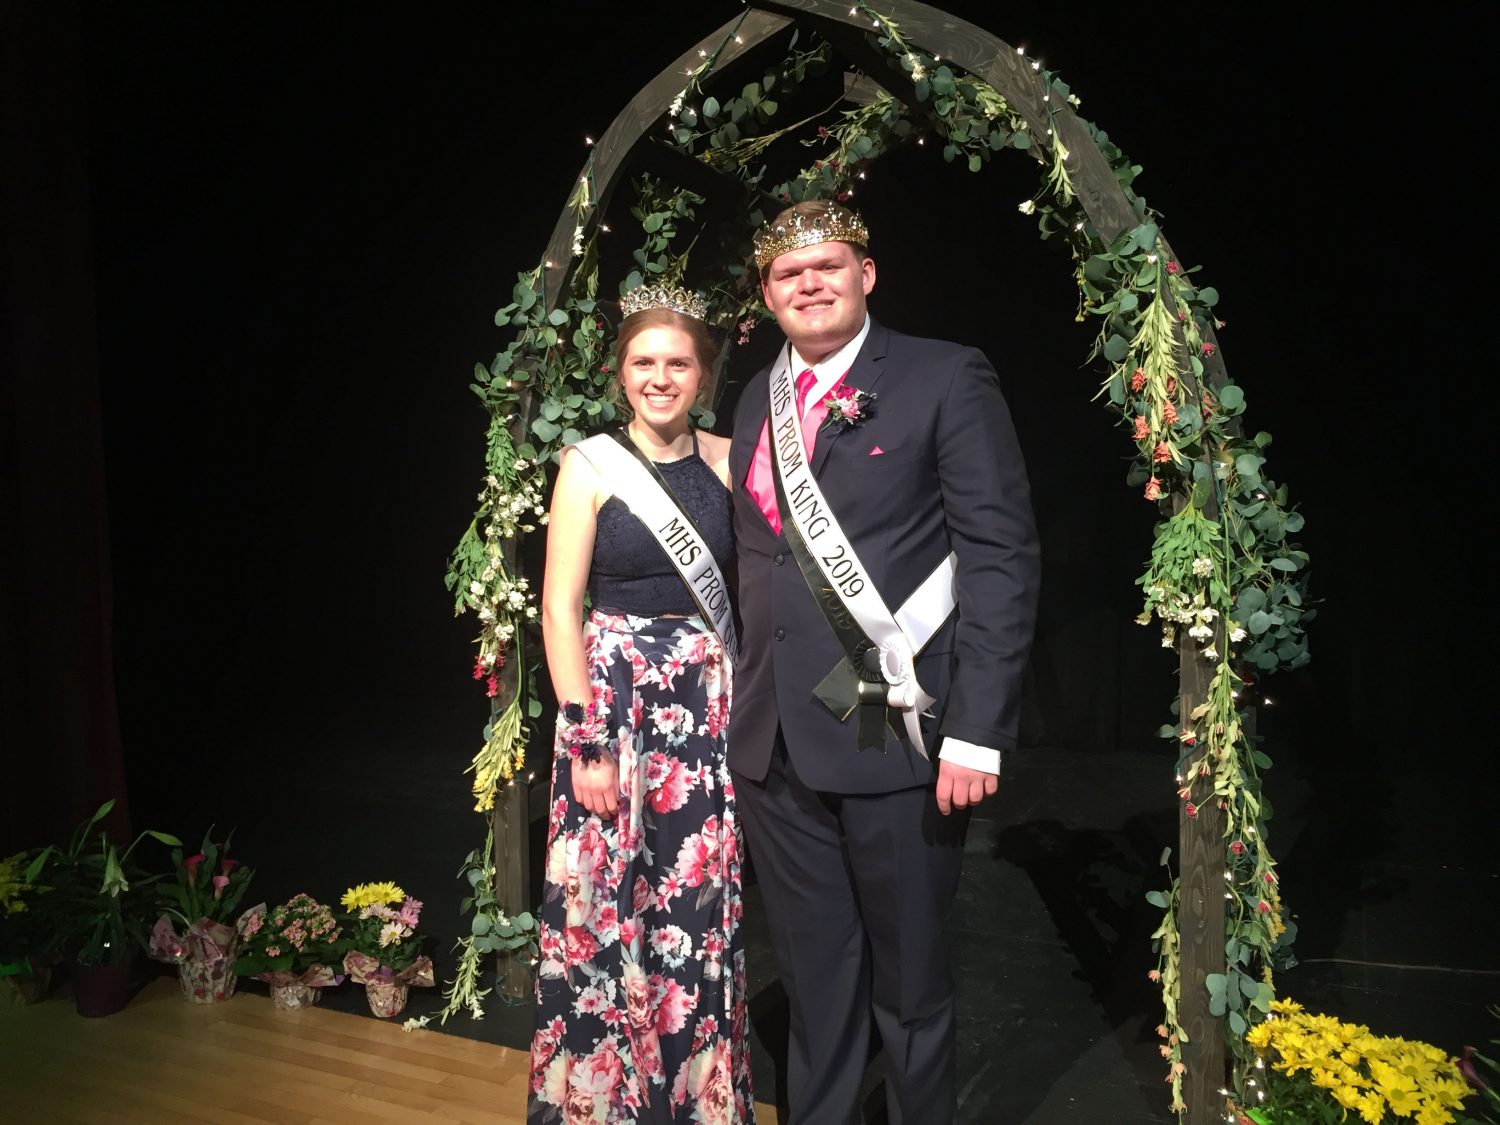 Dresen, Smith crowned 2019 Prom King and Queen